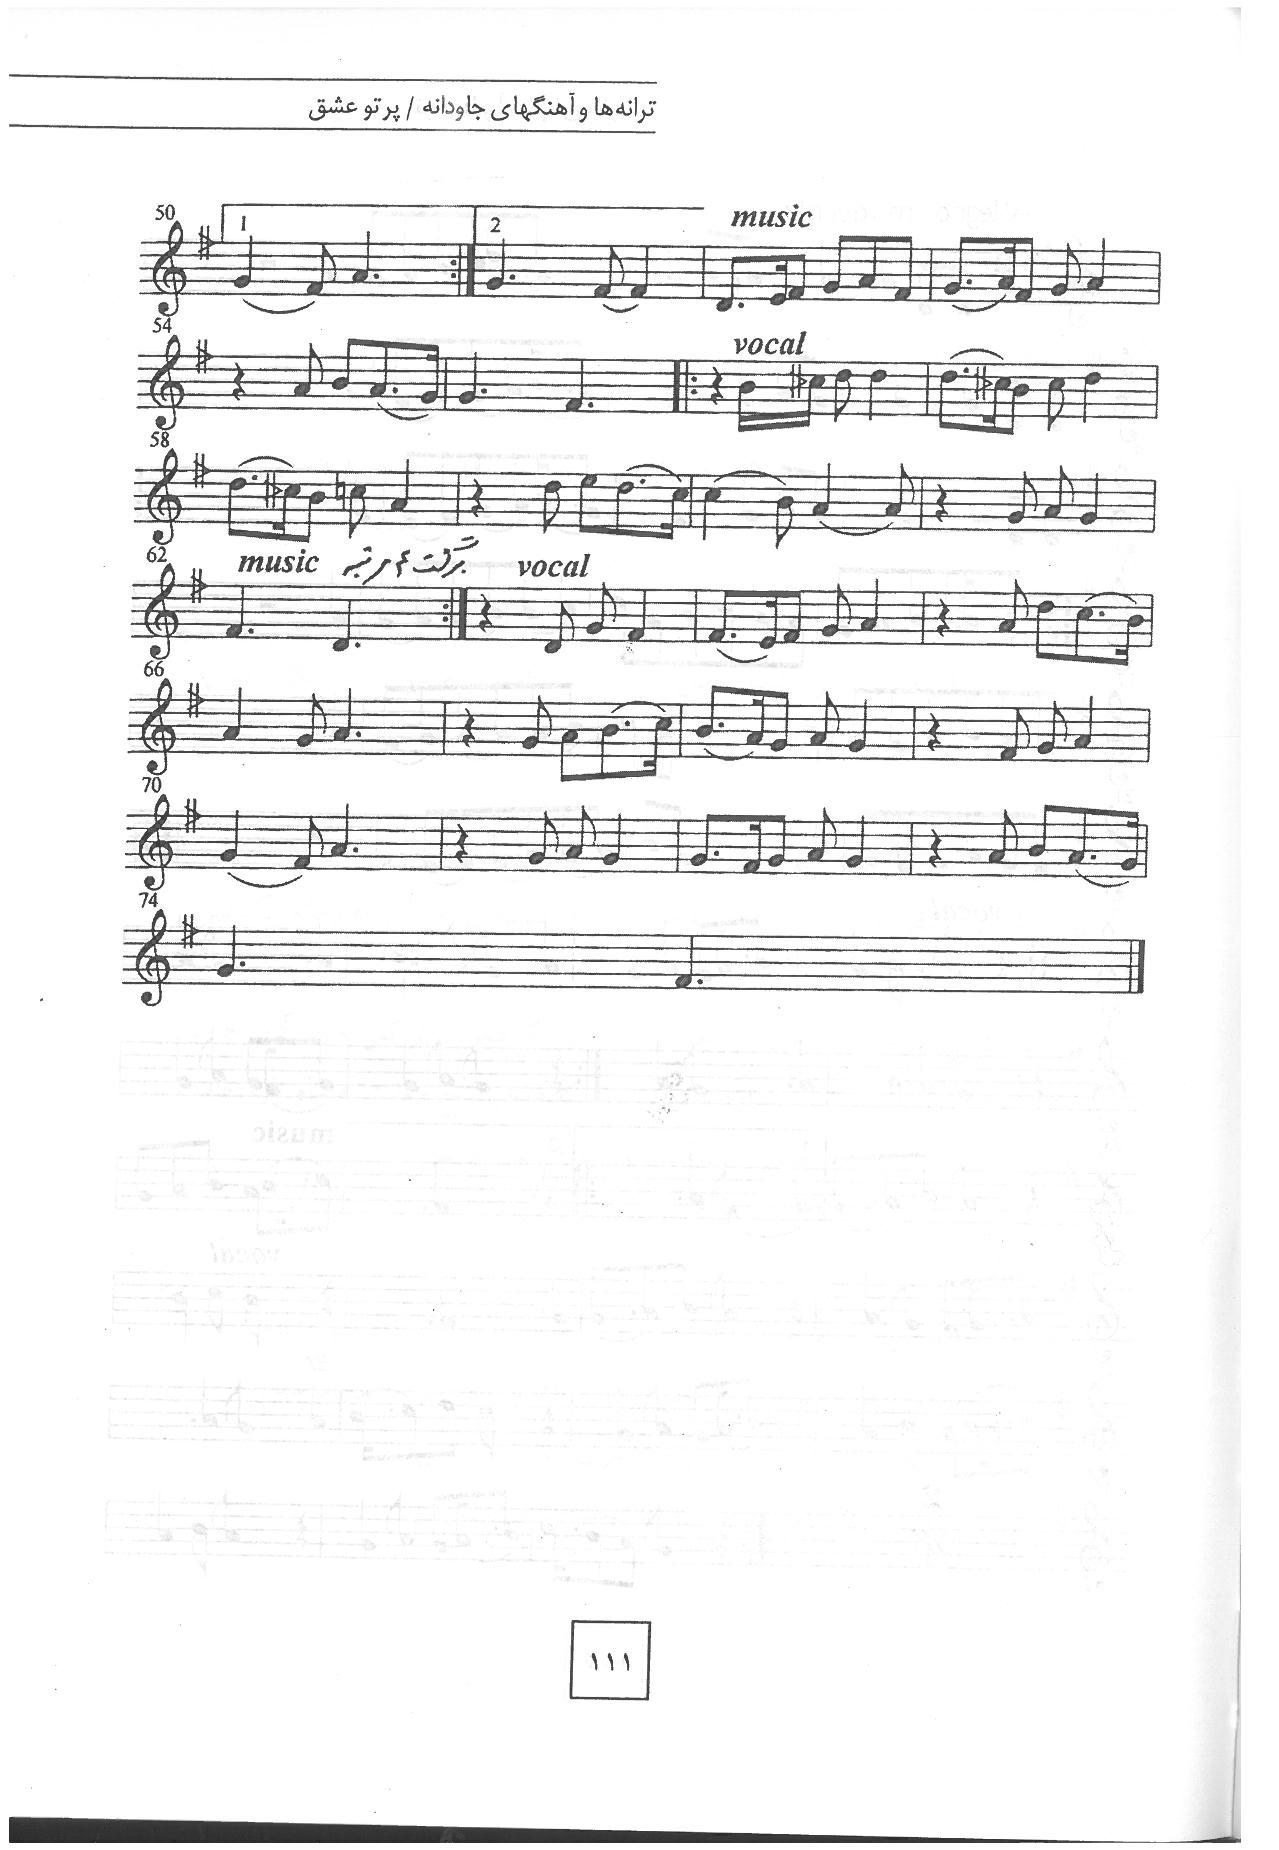 A sheet music page with several notes and lines.